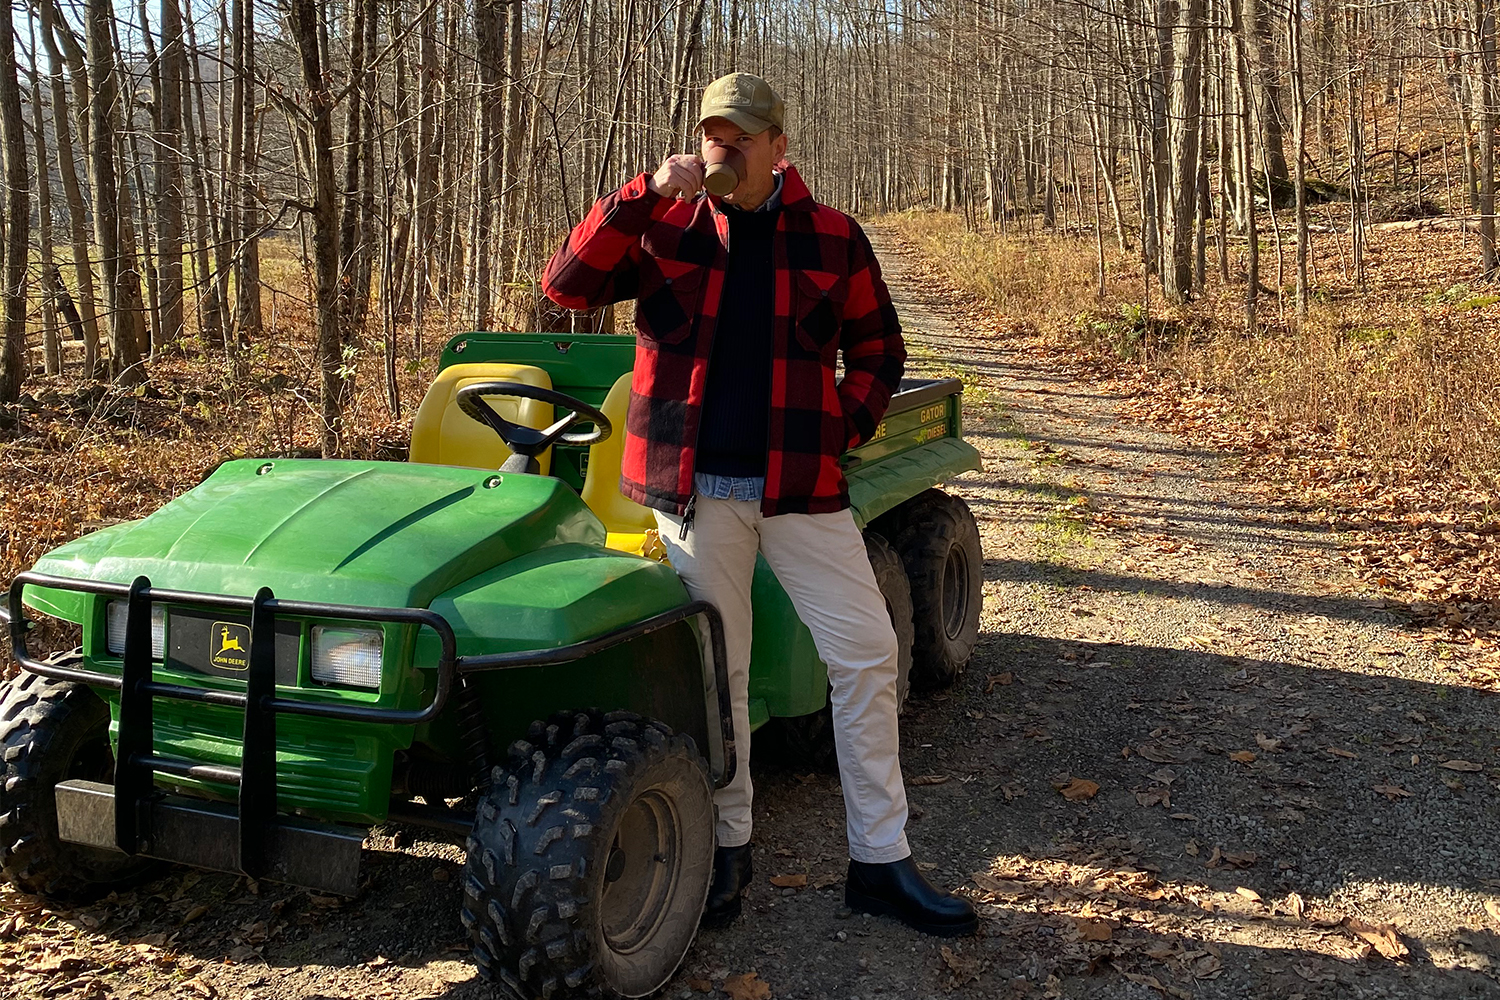 Photographer and magazine editor Matt Hranek sipping a cup of coffee in a buffalo plaid Woolrich jacket standing next to his John Deere Gator utility vehicle in the woods at his upstate New York estate